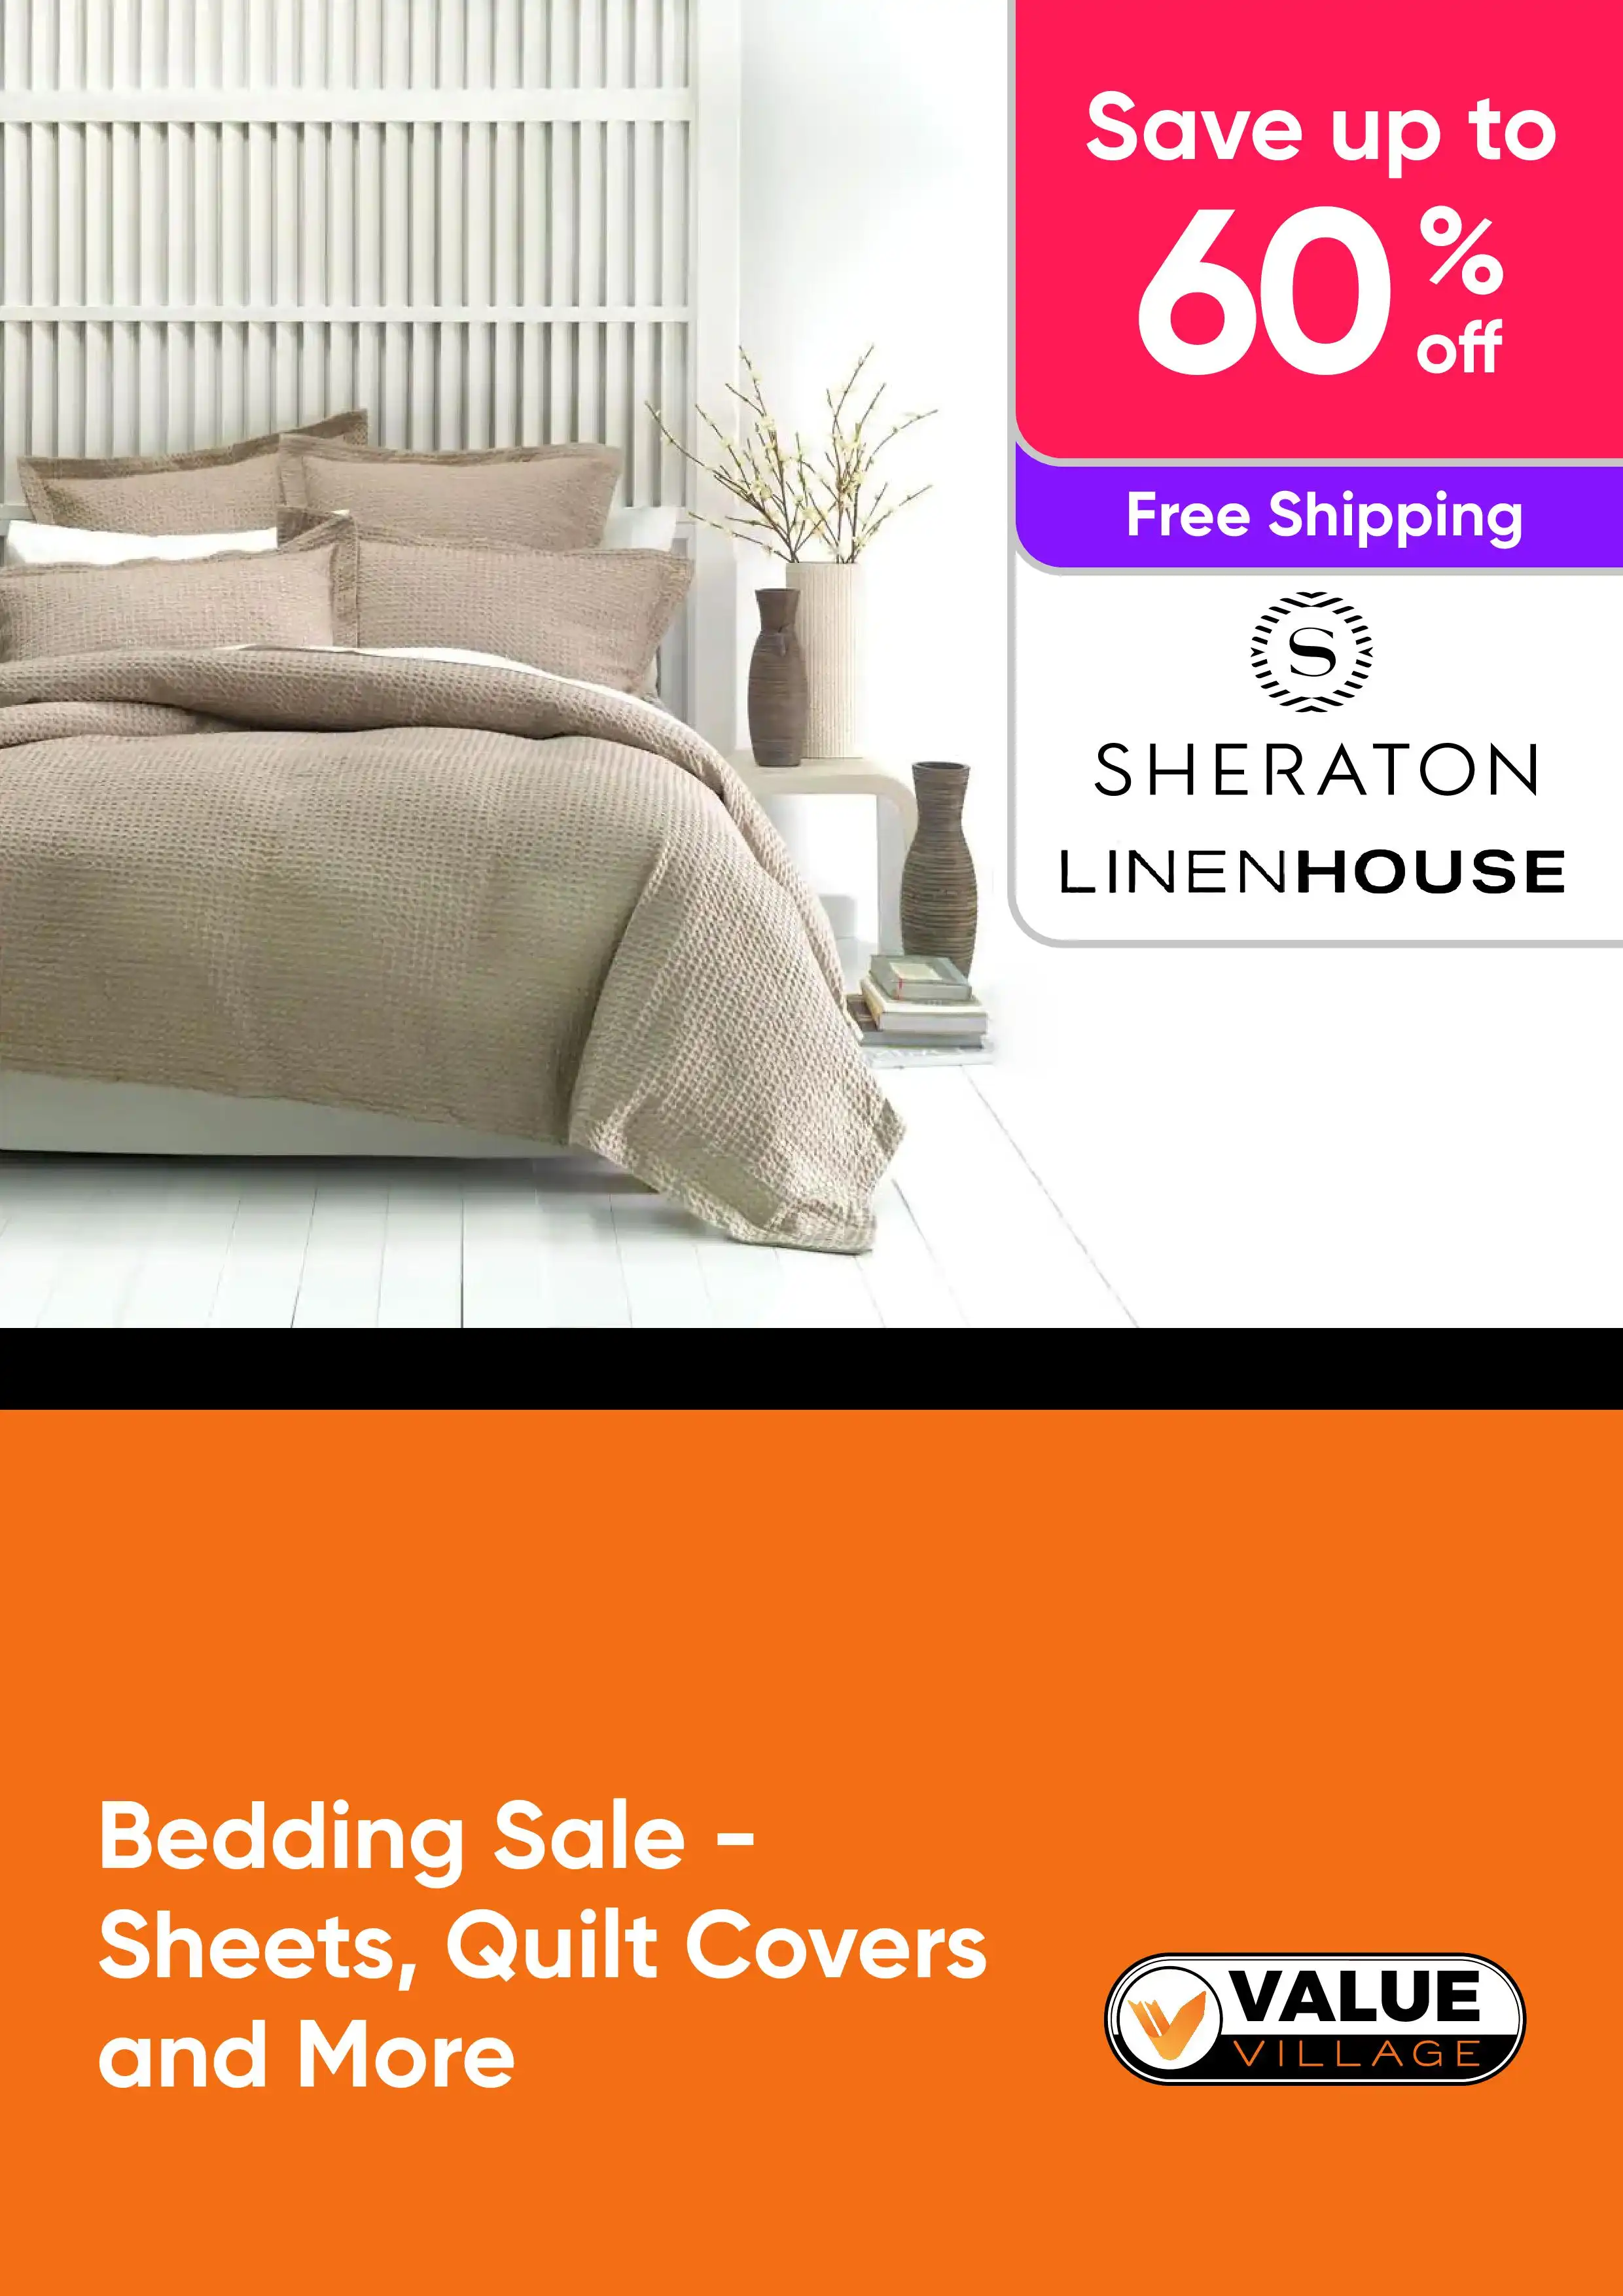 Bedding Sale - Sheets, Quilt Covers and More - Linen House, Sheraton - Up to 60% Off 